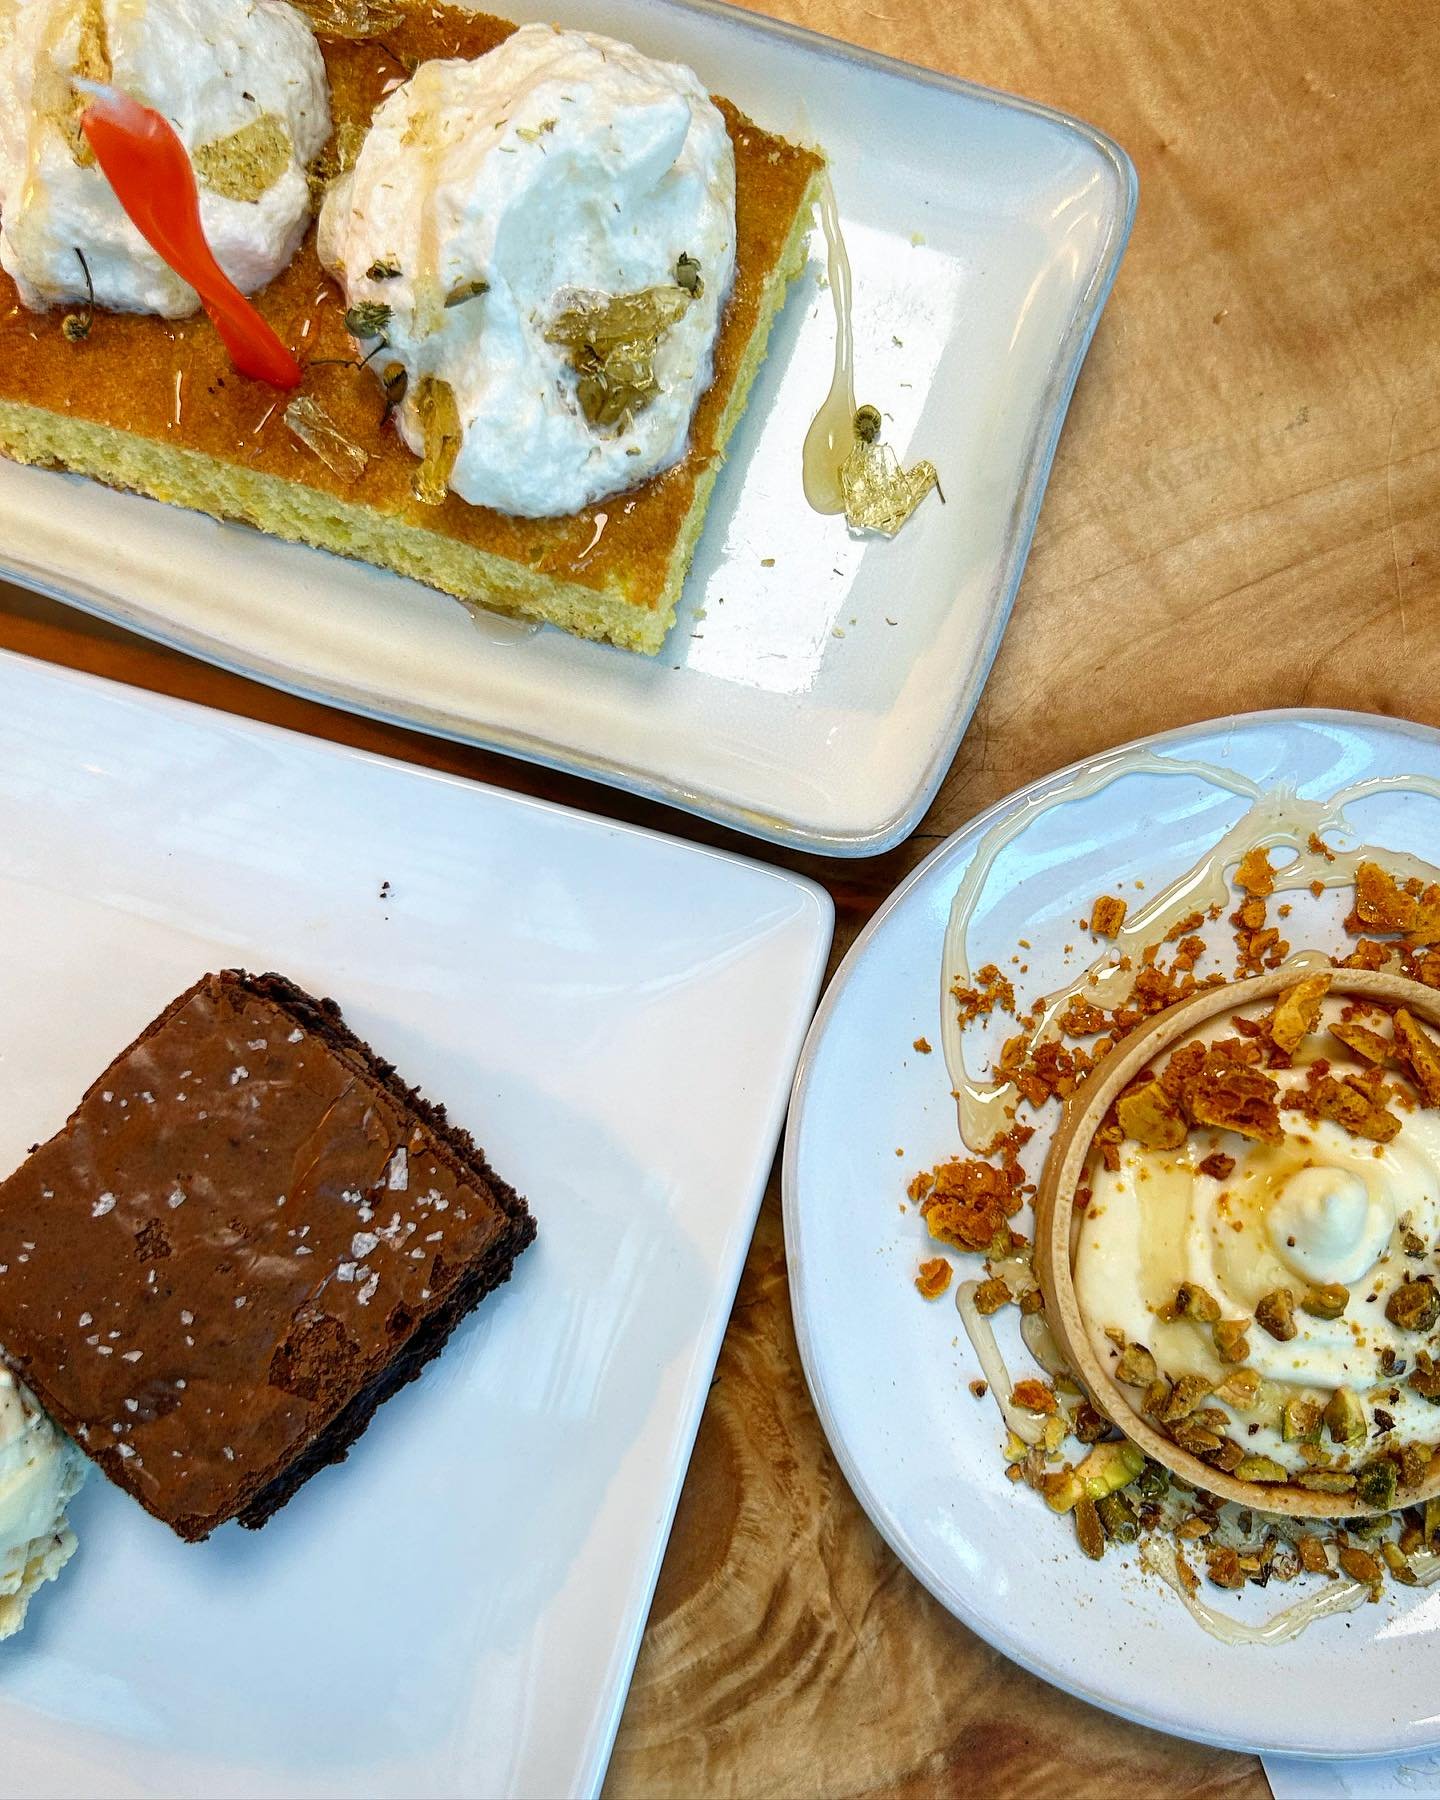 We&rsquo;ve got the desserts if you just wanna come eat your 🌧️ day, sad feelings. Take one dark chocolate brownie, lemon cake, and a milk &amp; honey&hellip;that should do the trick.